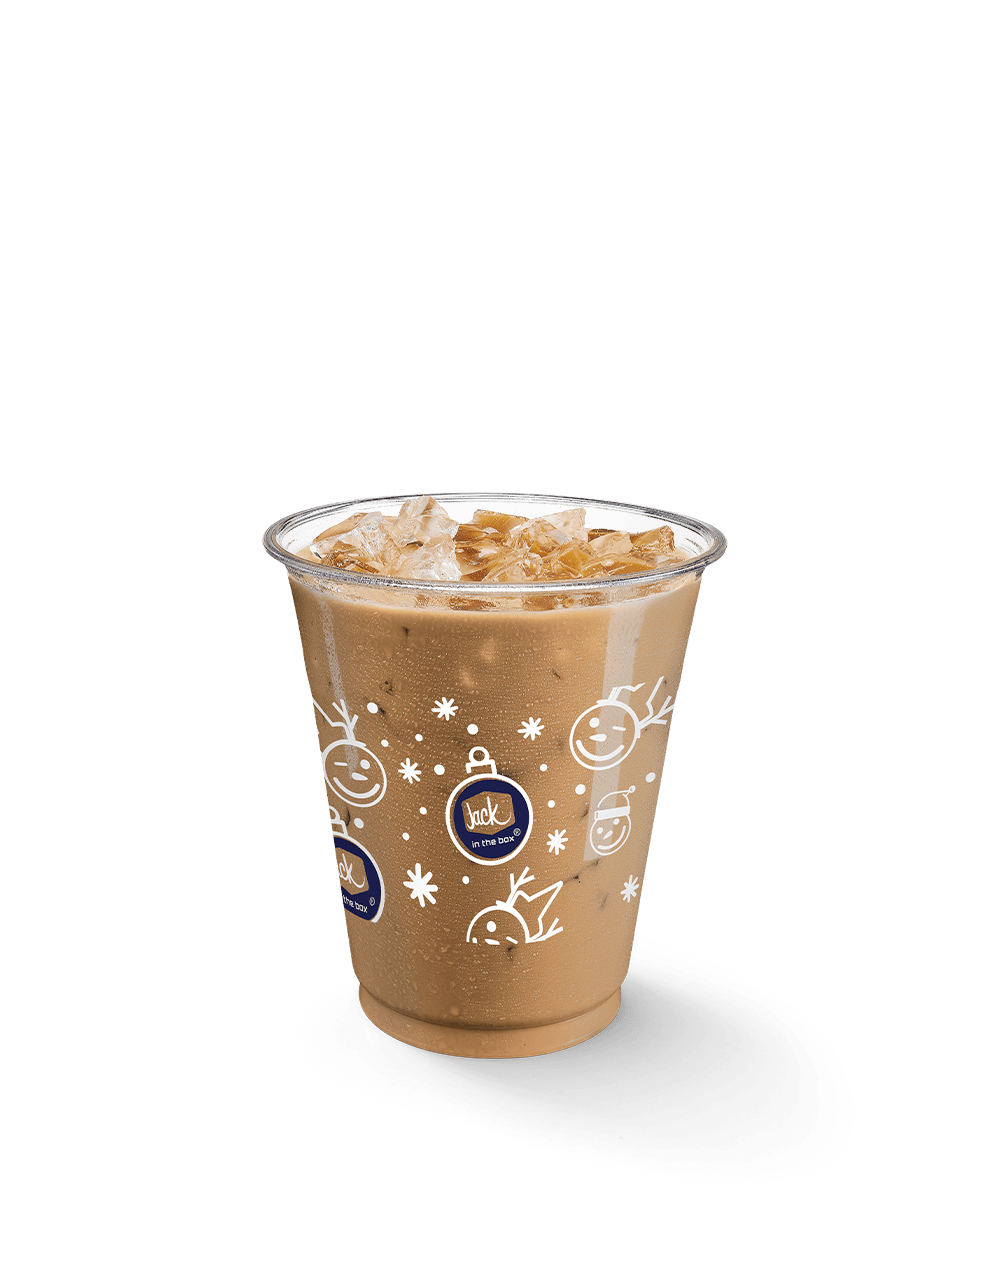 Jack in the Box Regular Iced Salted Caramel Mocha Nutrition Facts